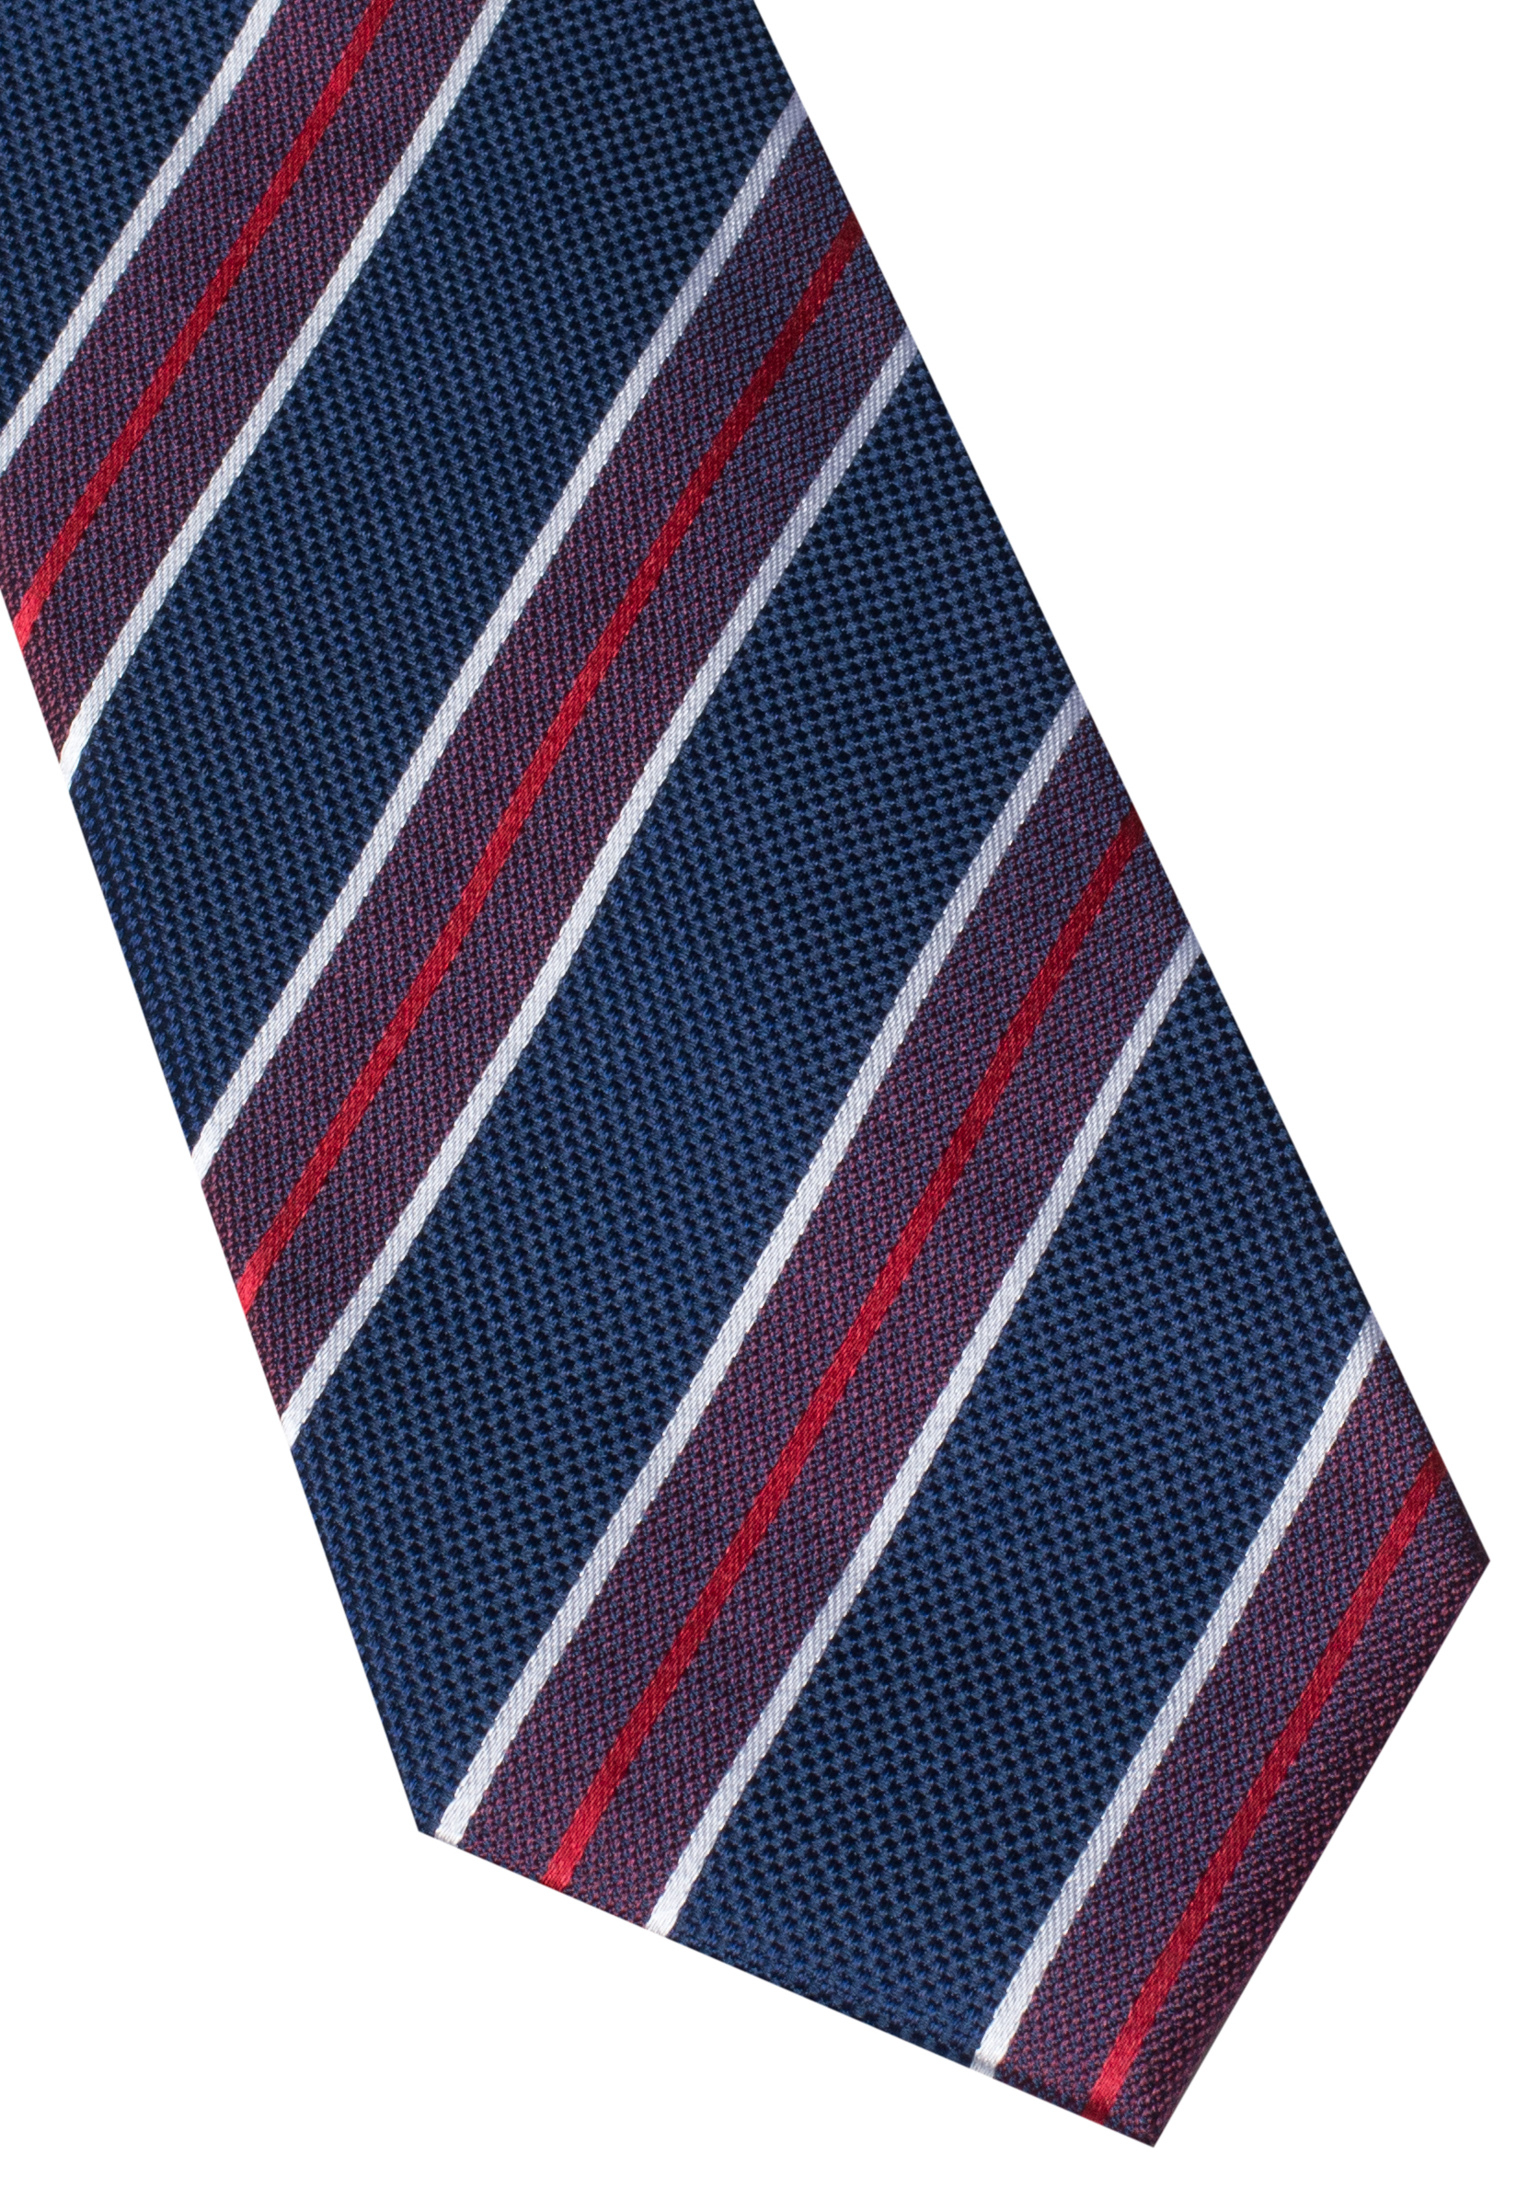 Tie in navy/red striped